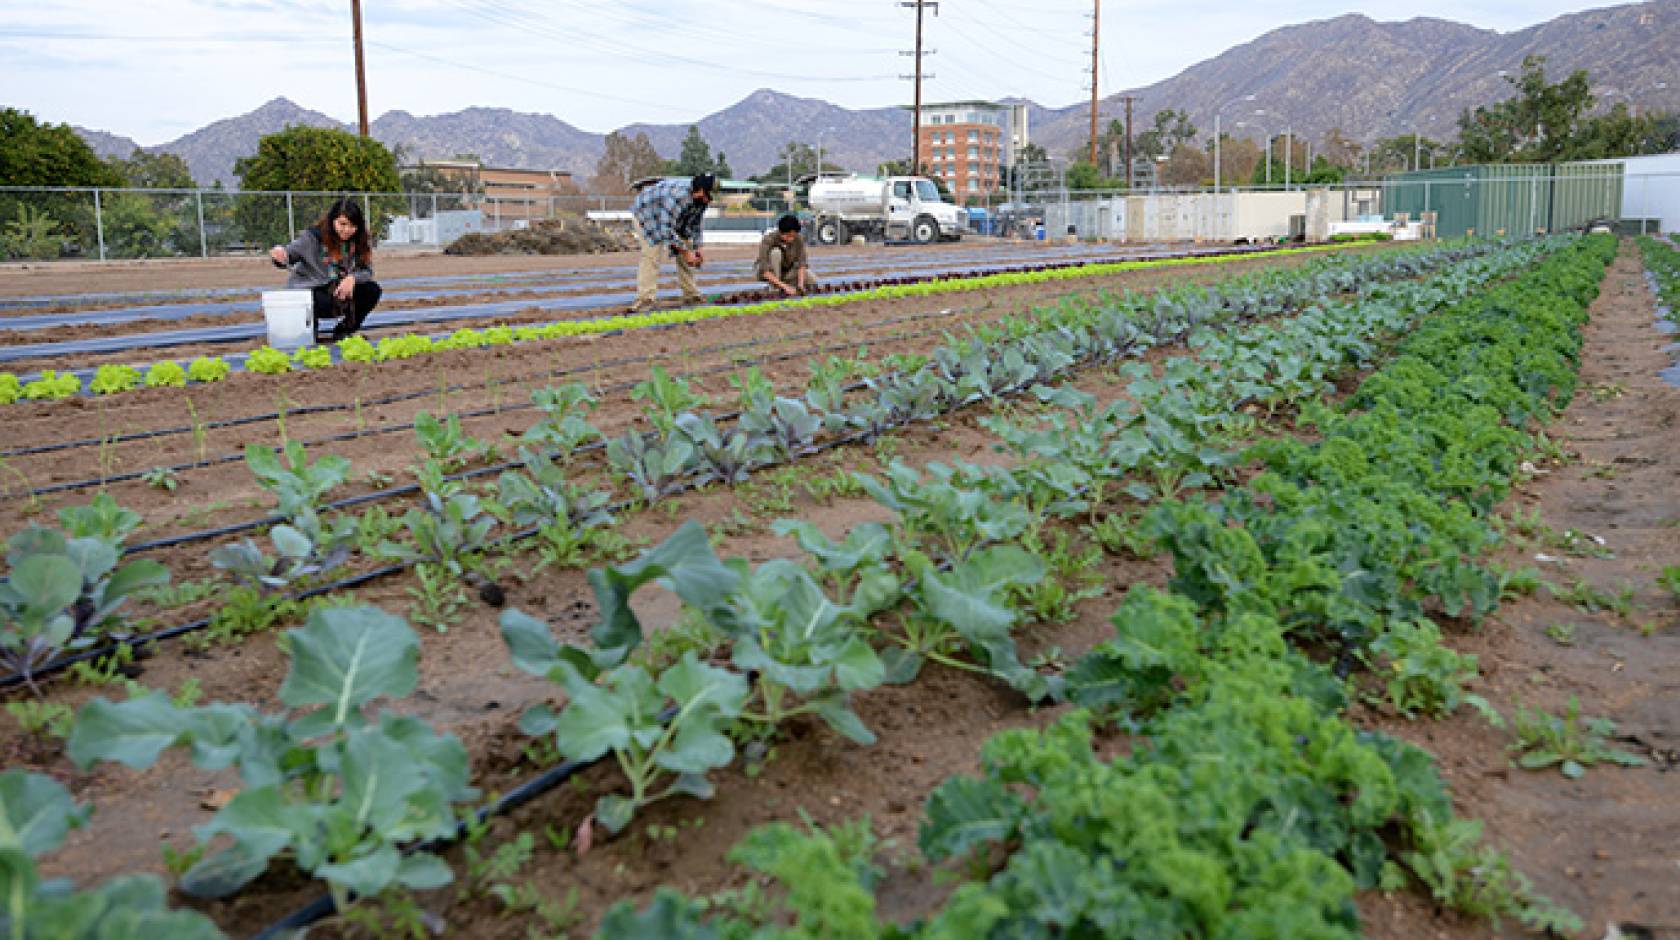 UC Riverside Global Food Security Week will take place May 9-15.